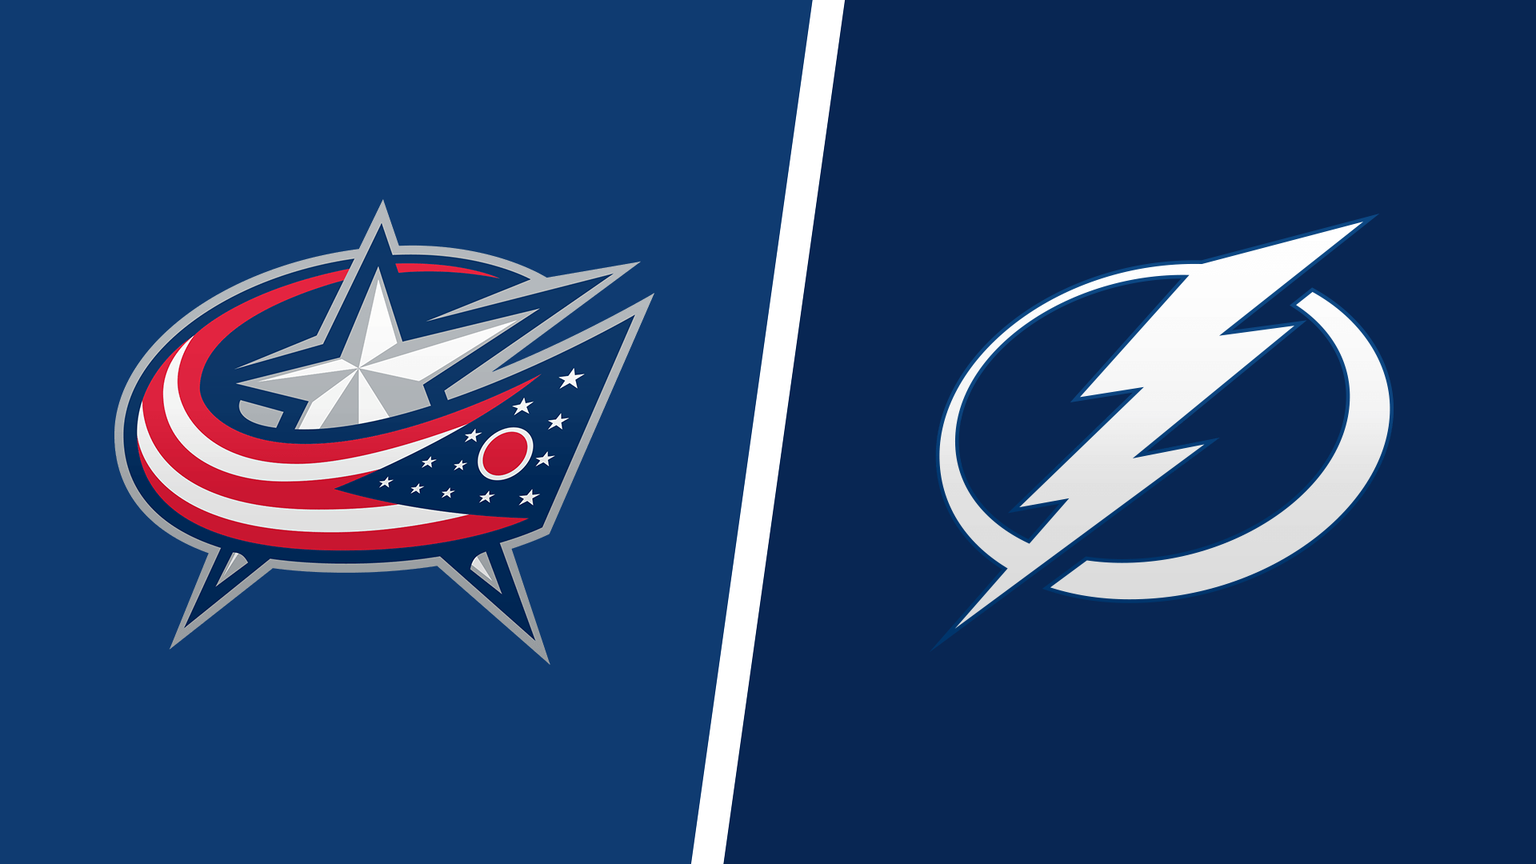 How to Watch Tampa Bay Lightning vs. Columbus Blue Jackets Game Live Online on October 14, 2022: Streaming/TV Channels